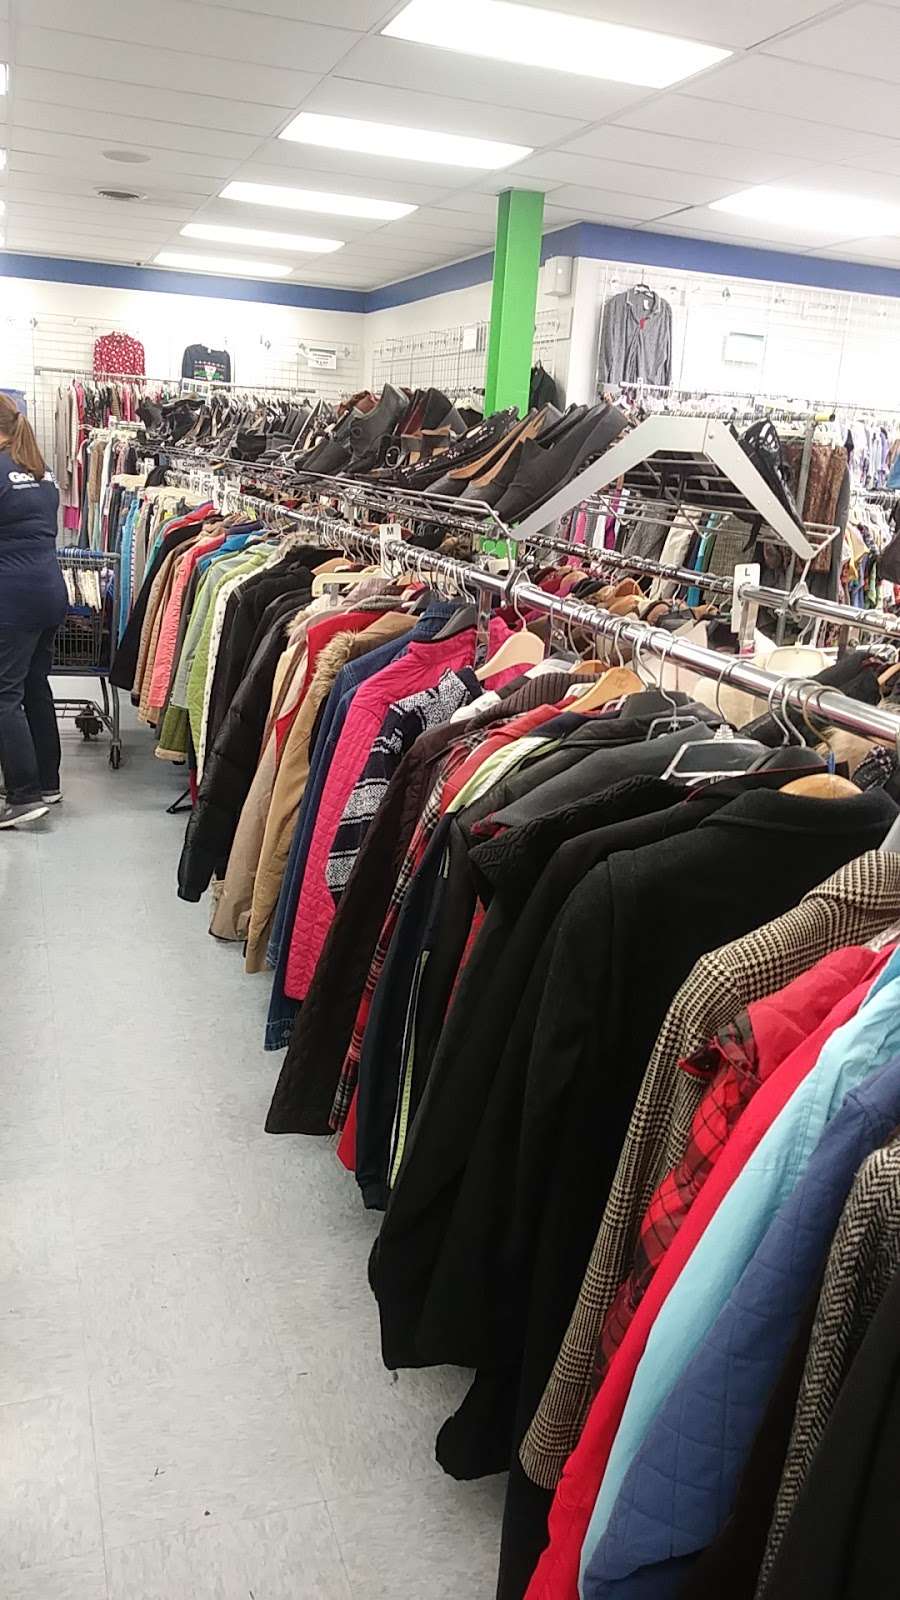 Goodwill Store & Donation Center | 324 E Penn Ave, Robesonia, PA 19551 | Phone: (610) 693-6014